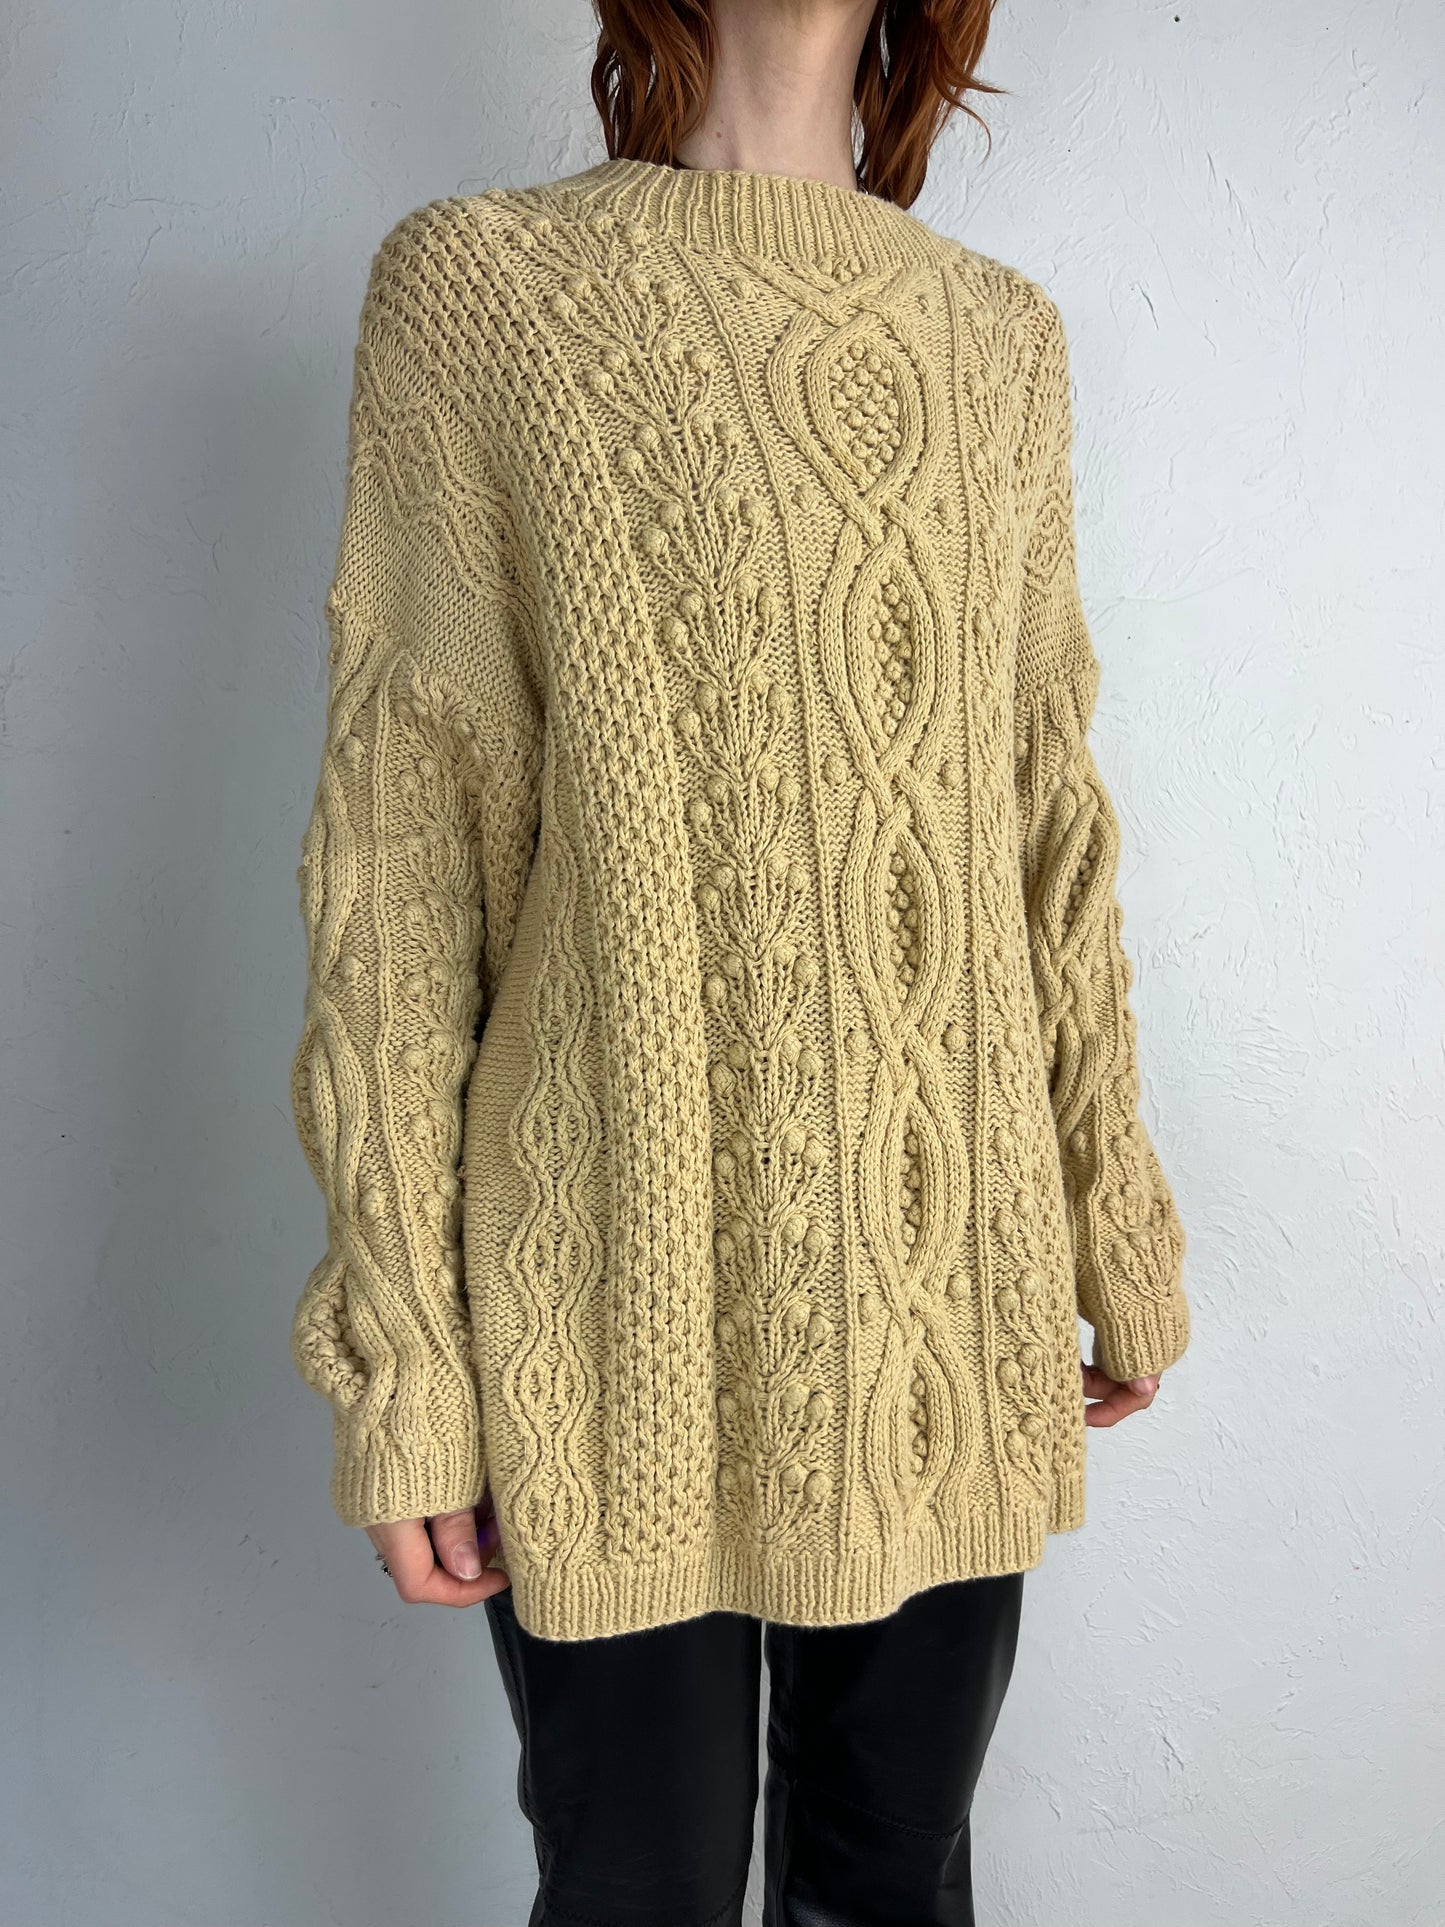 90s 'Express' Beige Cotton Ramie Oversized Knit Sweater / Small